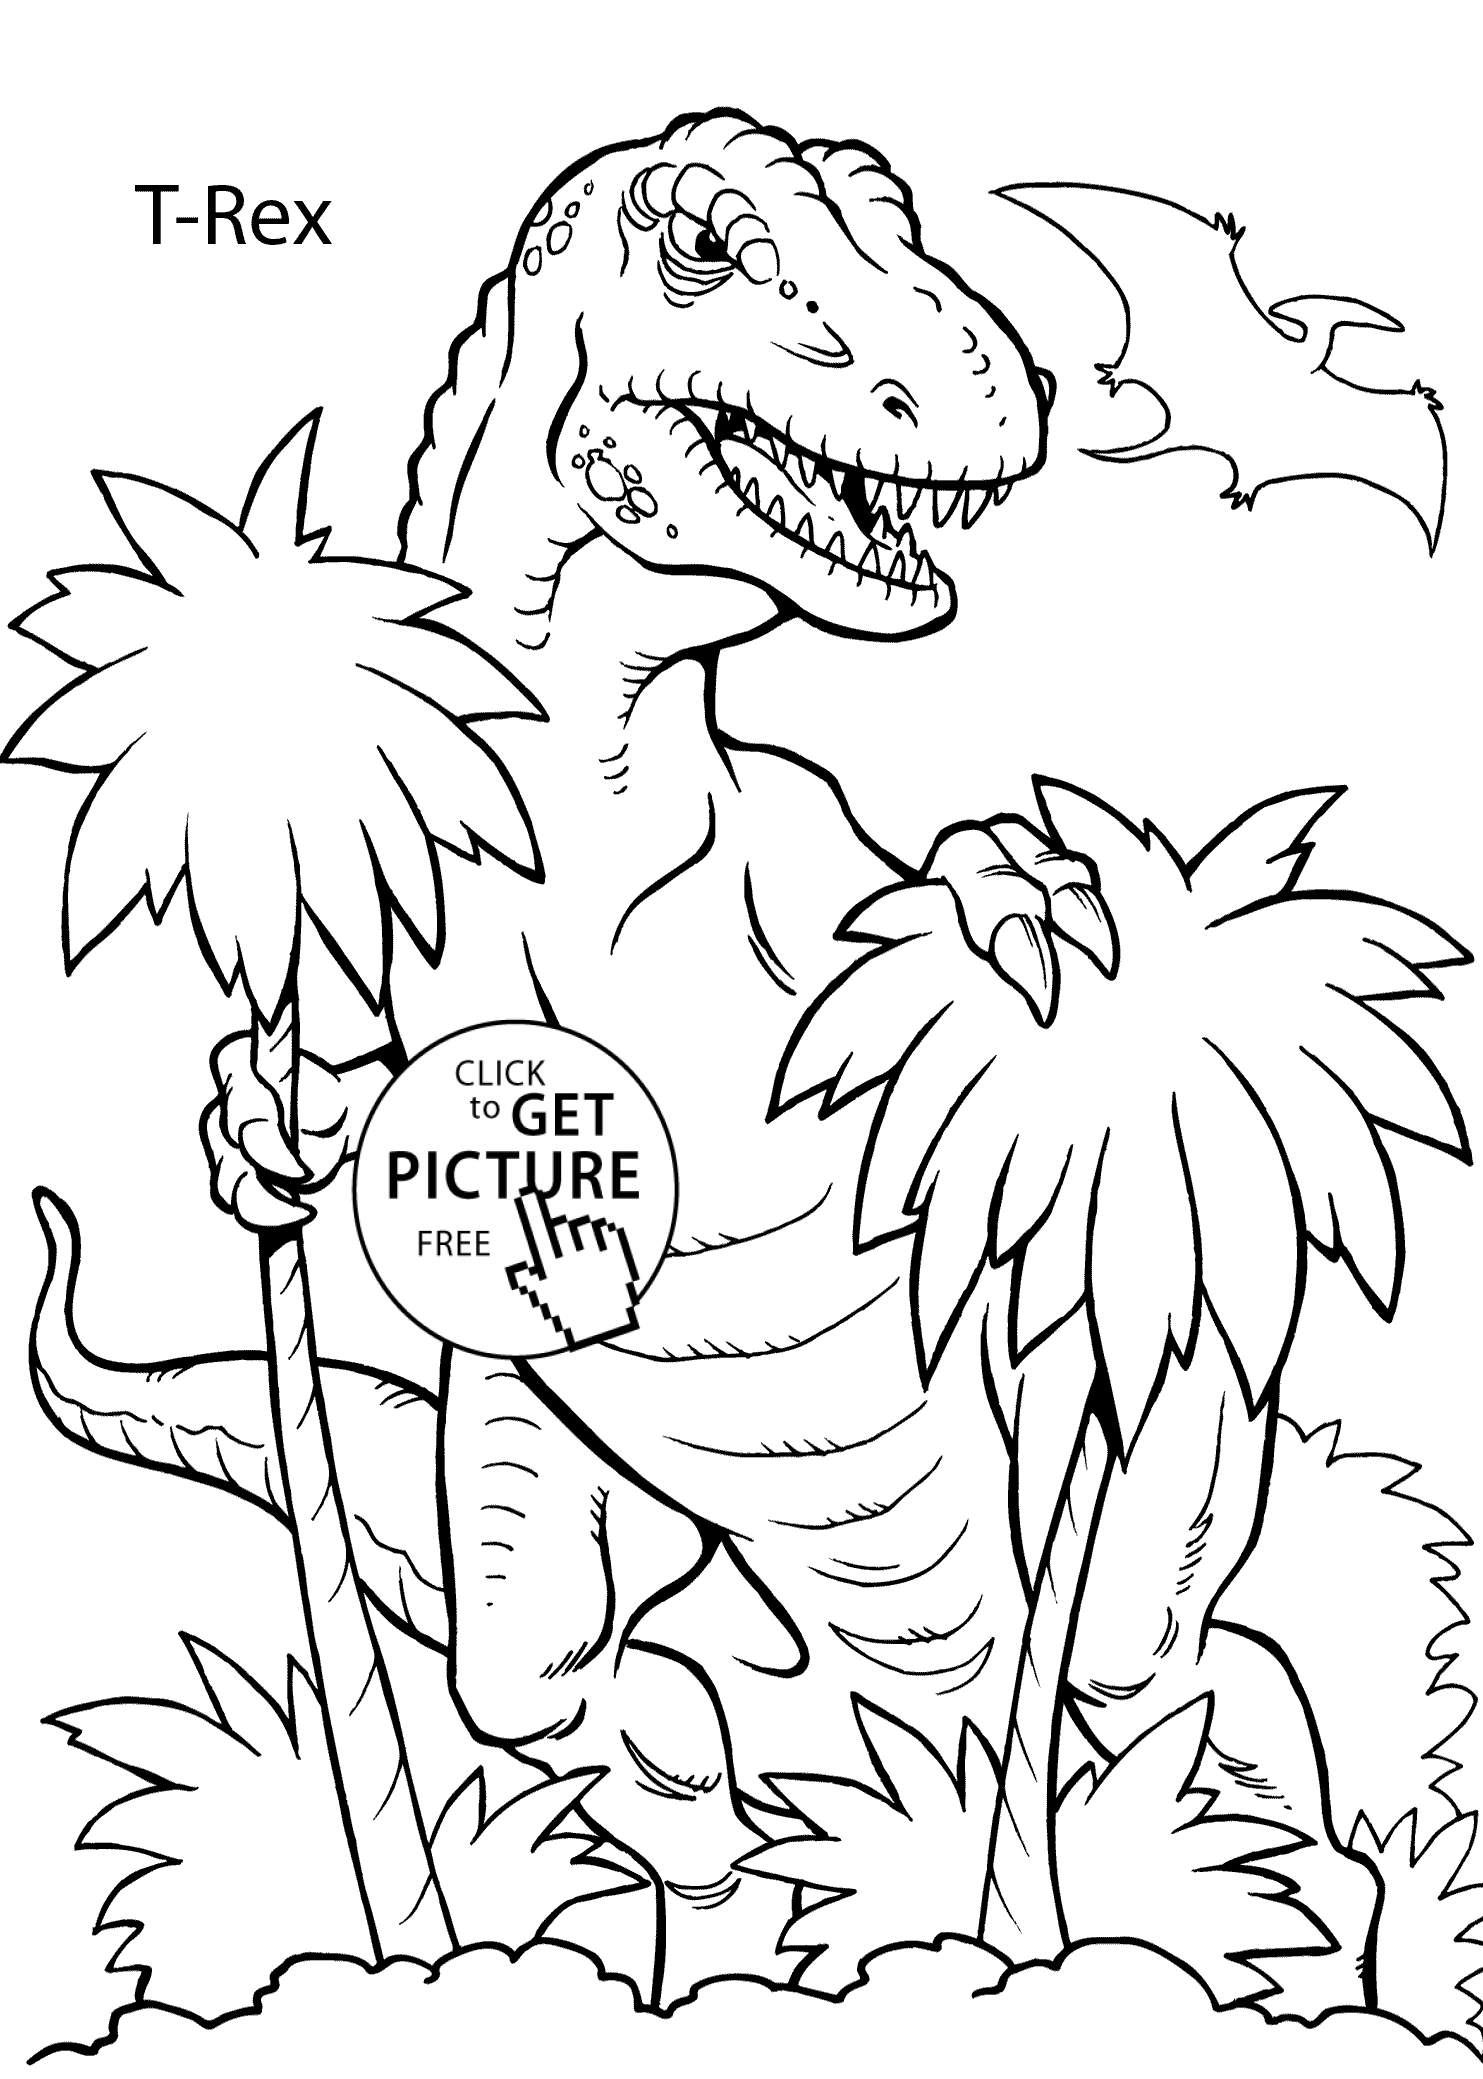 T Rex Dinosaur Coloring Pages For Kids, Printable Free   Coloing ...